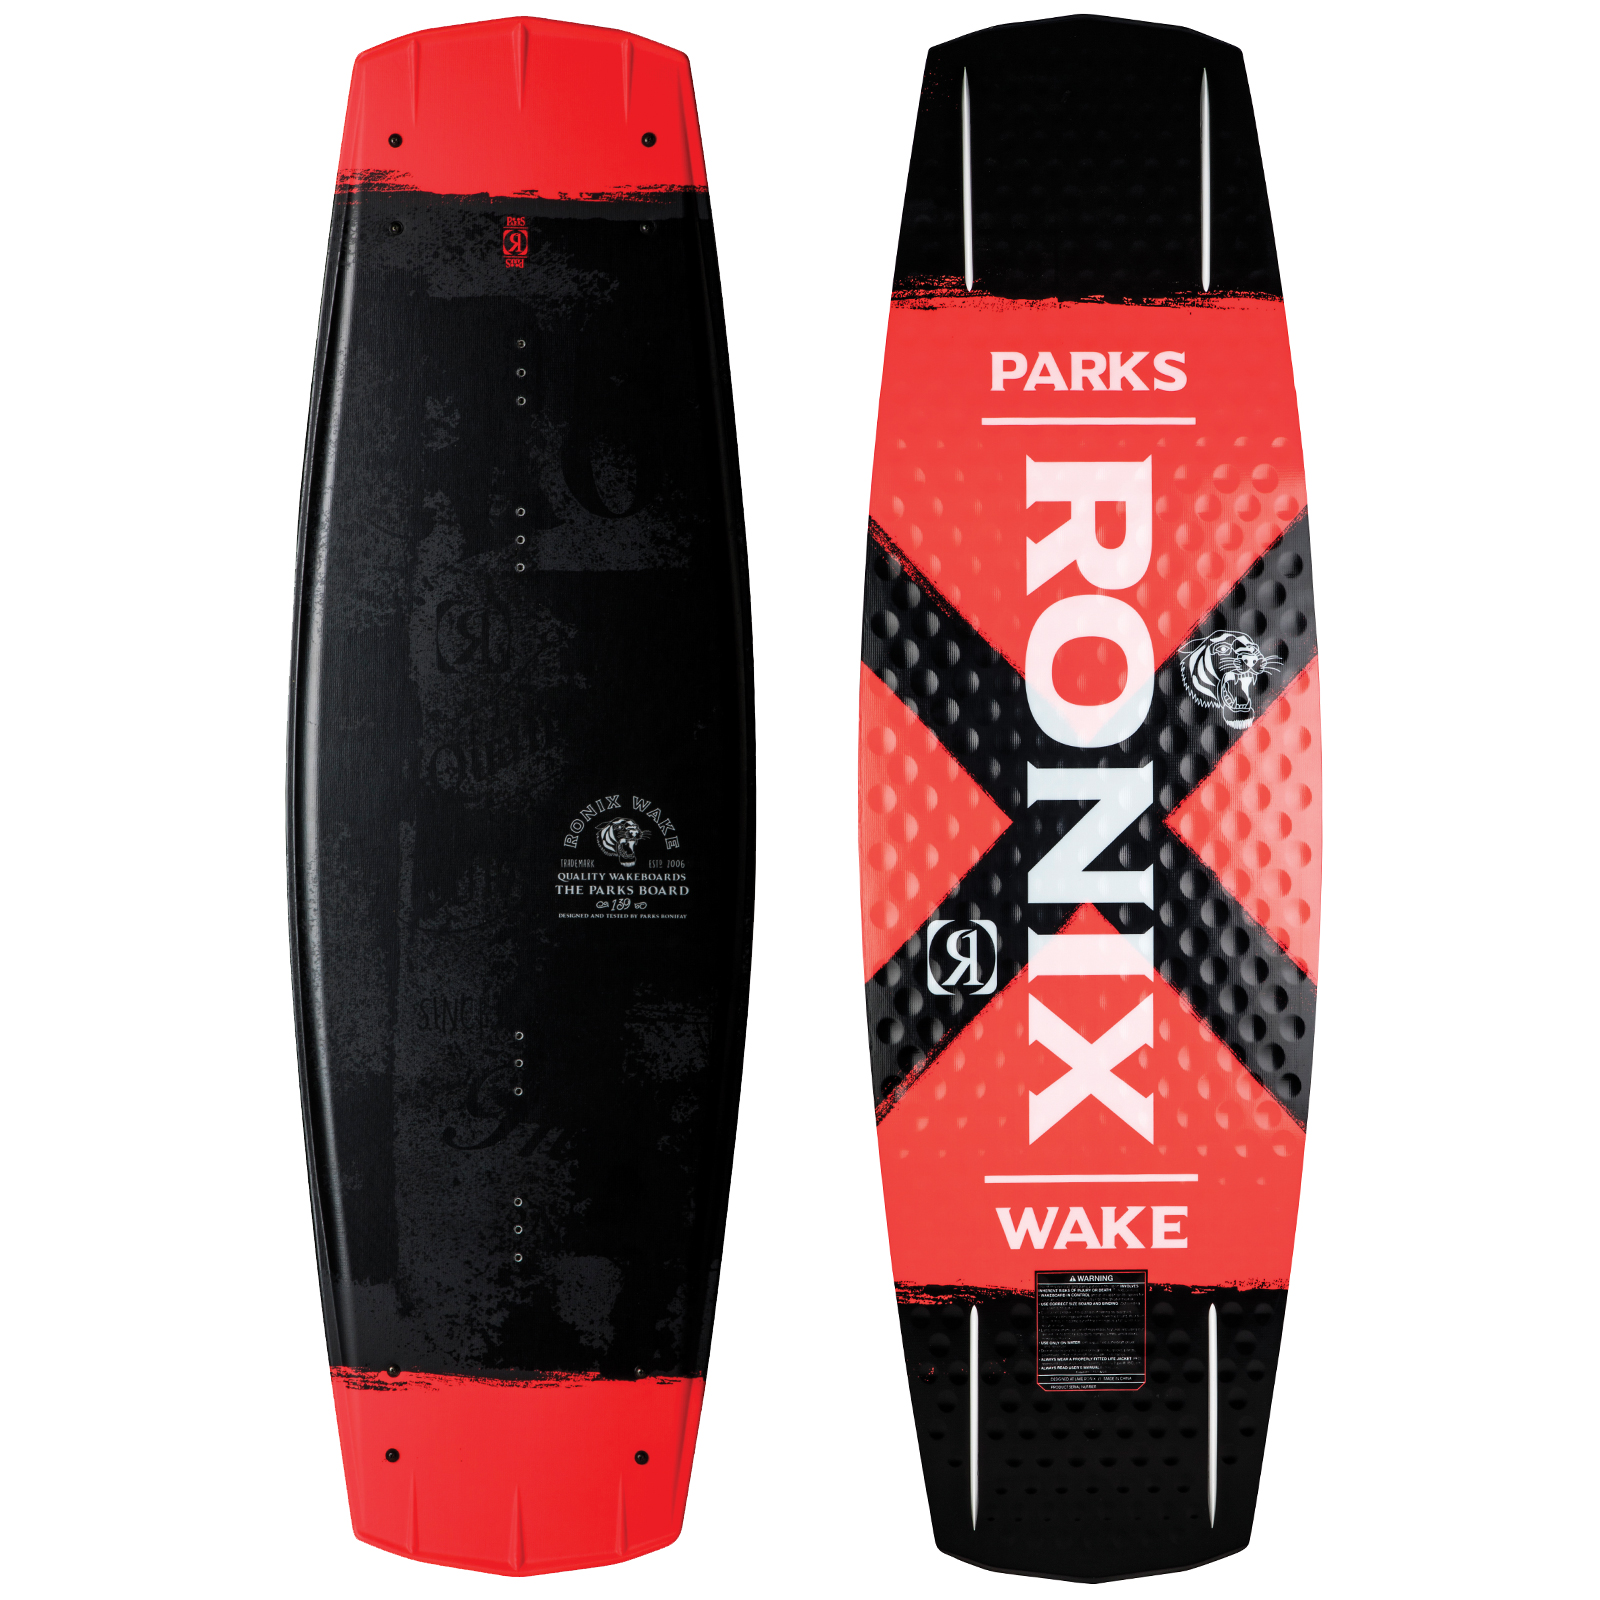 PLACA WAKEBOARD PARKS MODELLO EDITION WAKEBOARD RONIX 2019